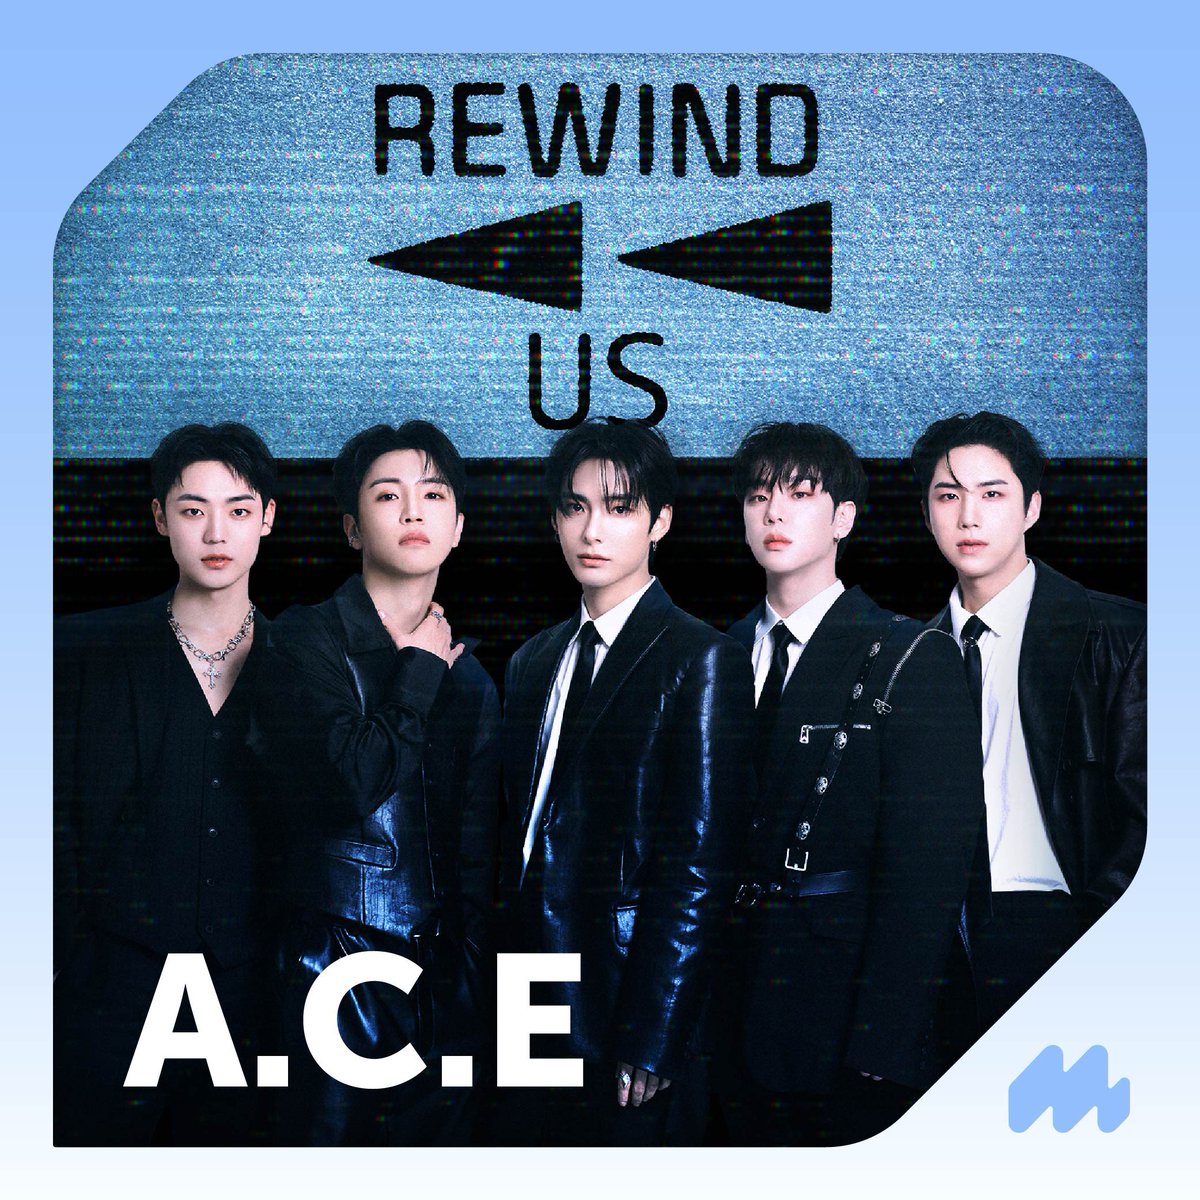 ⏪A.C.E 2024 US Tour [REWIND_US] Gotta get ready to jam along with @official_ACE7 till the end 🎶 Prepare for the big night with the playlist! 💿 mmt.fans/b0nF But wait, did you grab your tickets tho? 👀 Ticket🎫 mmt.fans/bwh7 M&G📸 mmt.fans/b0Tf…